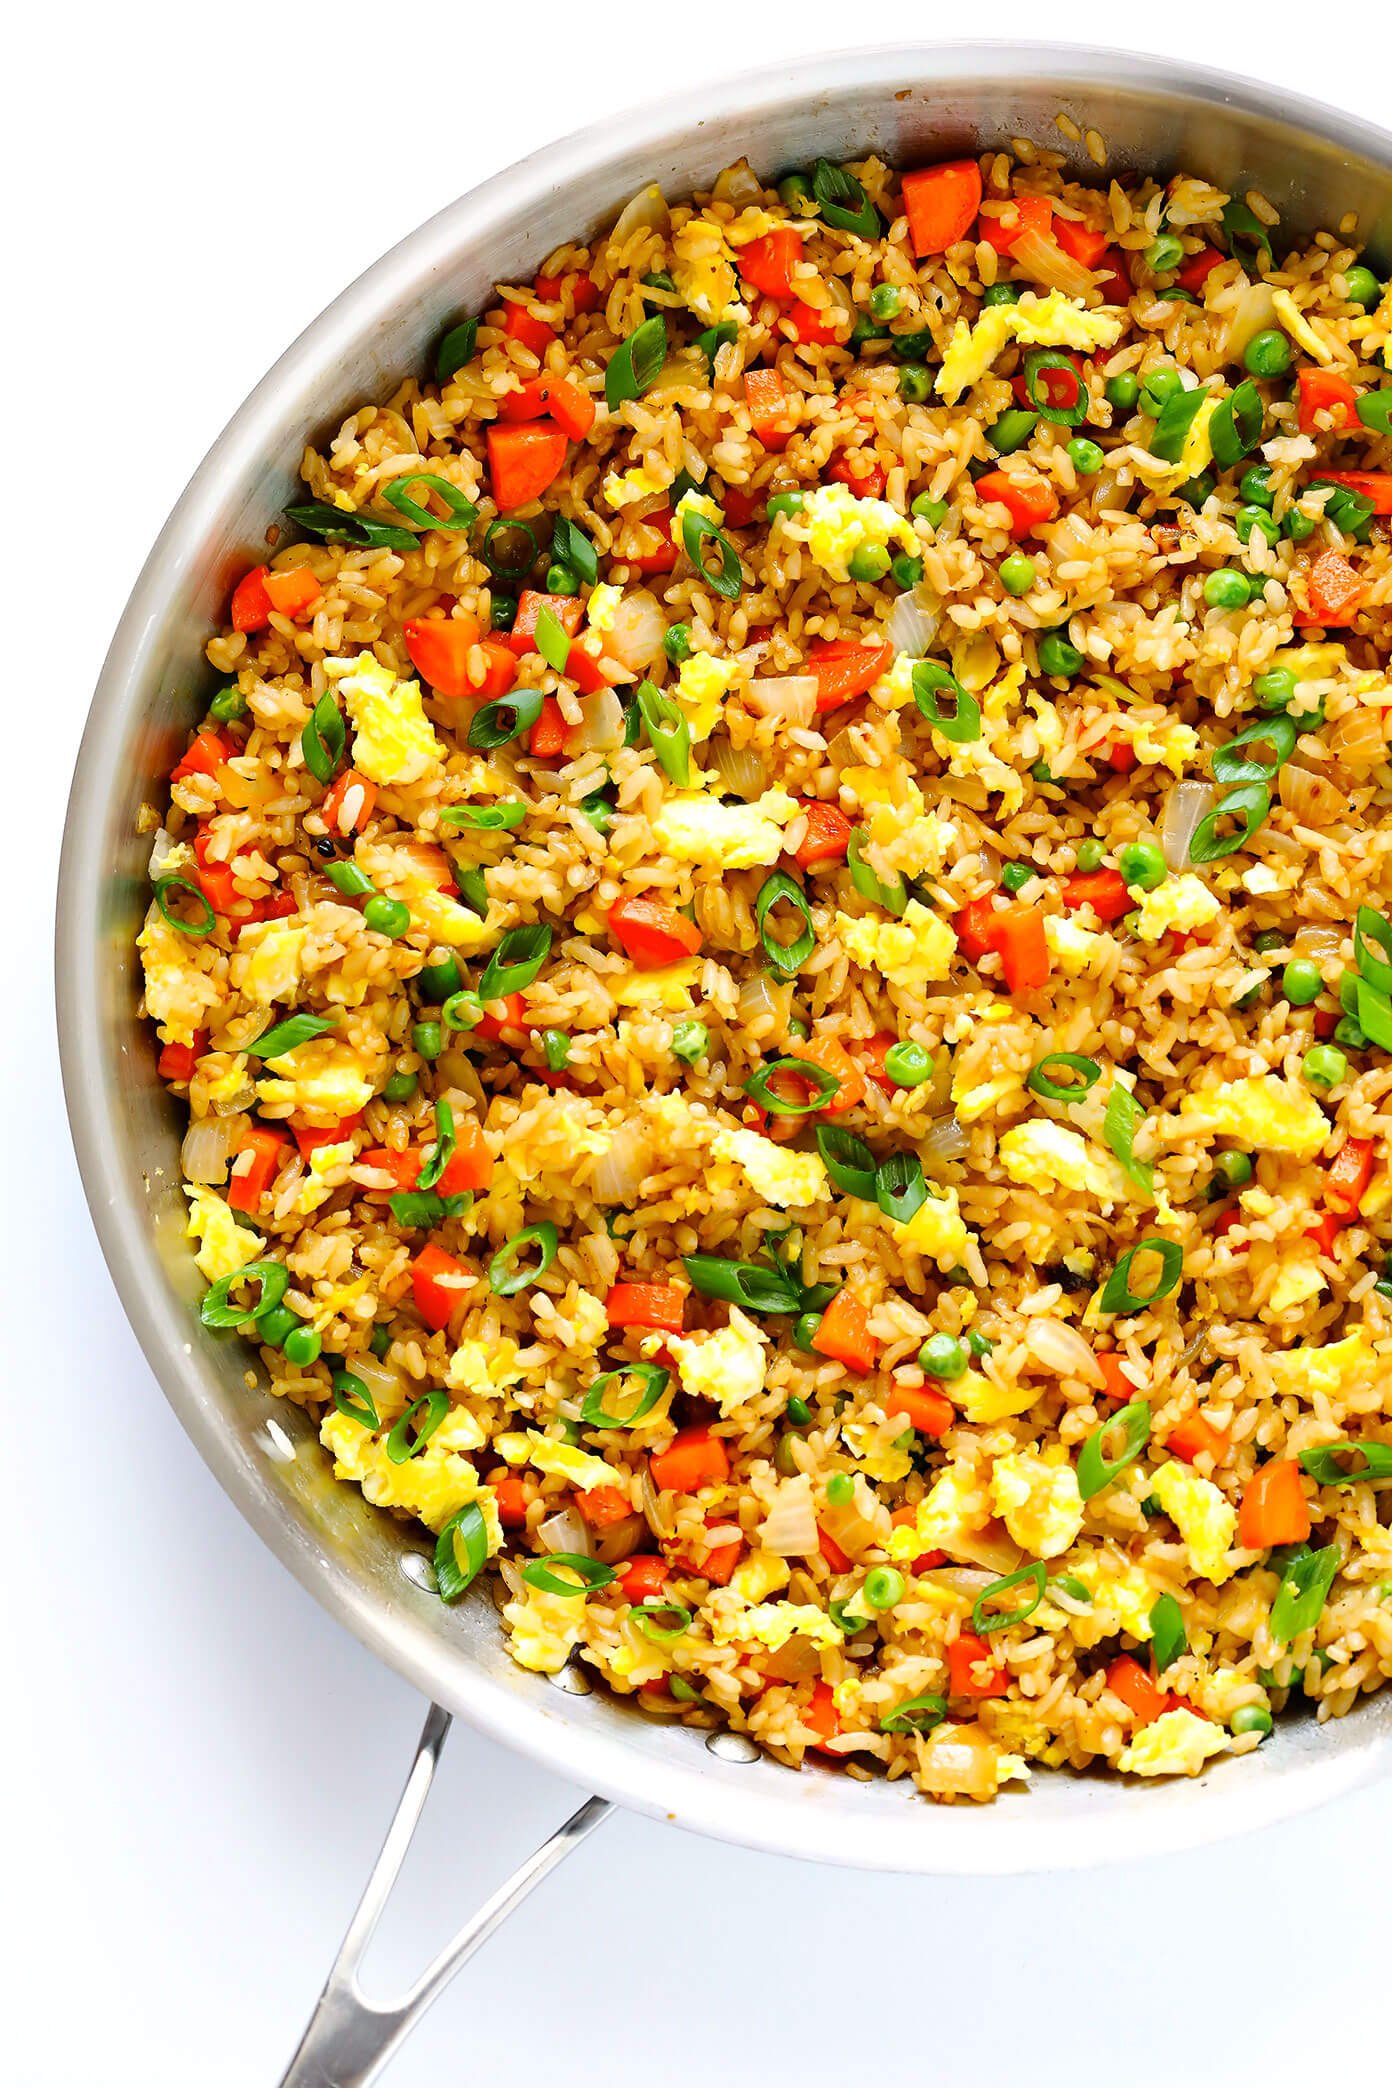 The Best Fried Rice Gimme Some Oven,Boneless Ribs In Oven Bag